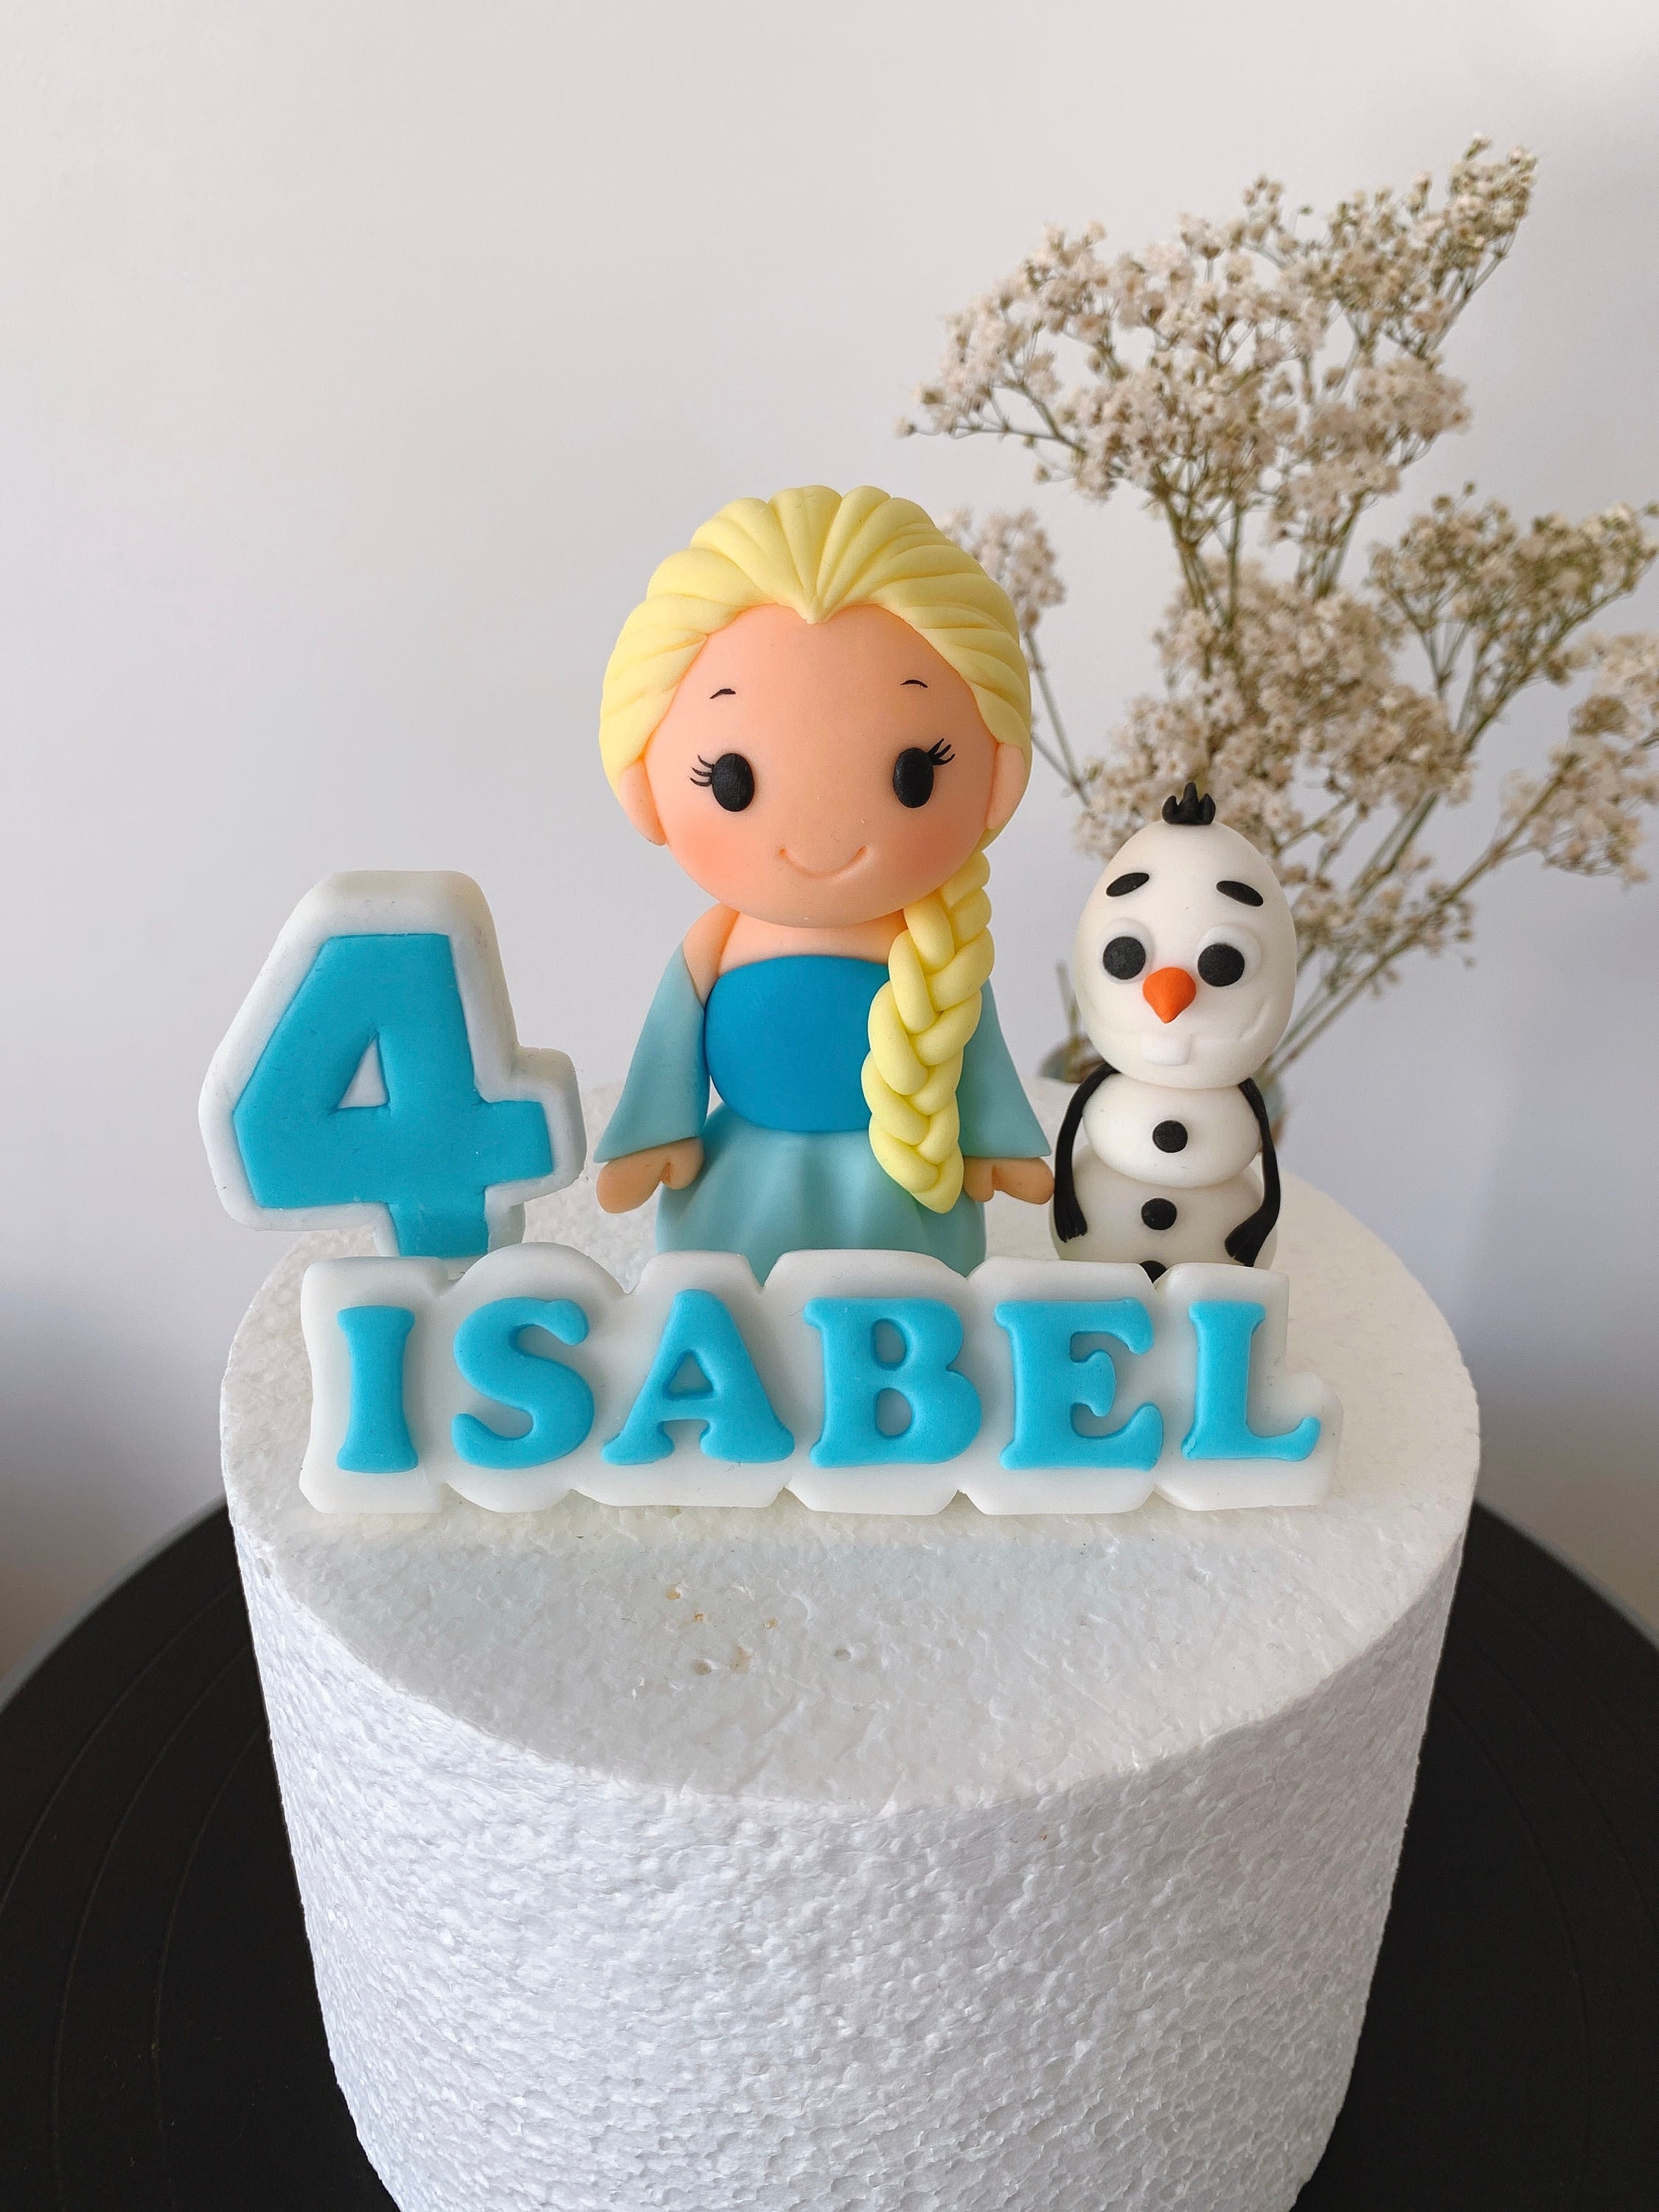 Bespoke Photo Cake | Cake Delivery in London | Cakes & Bakes